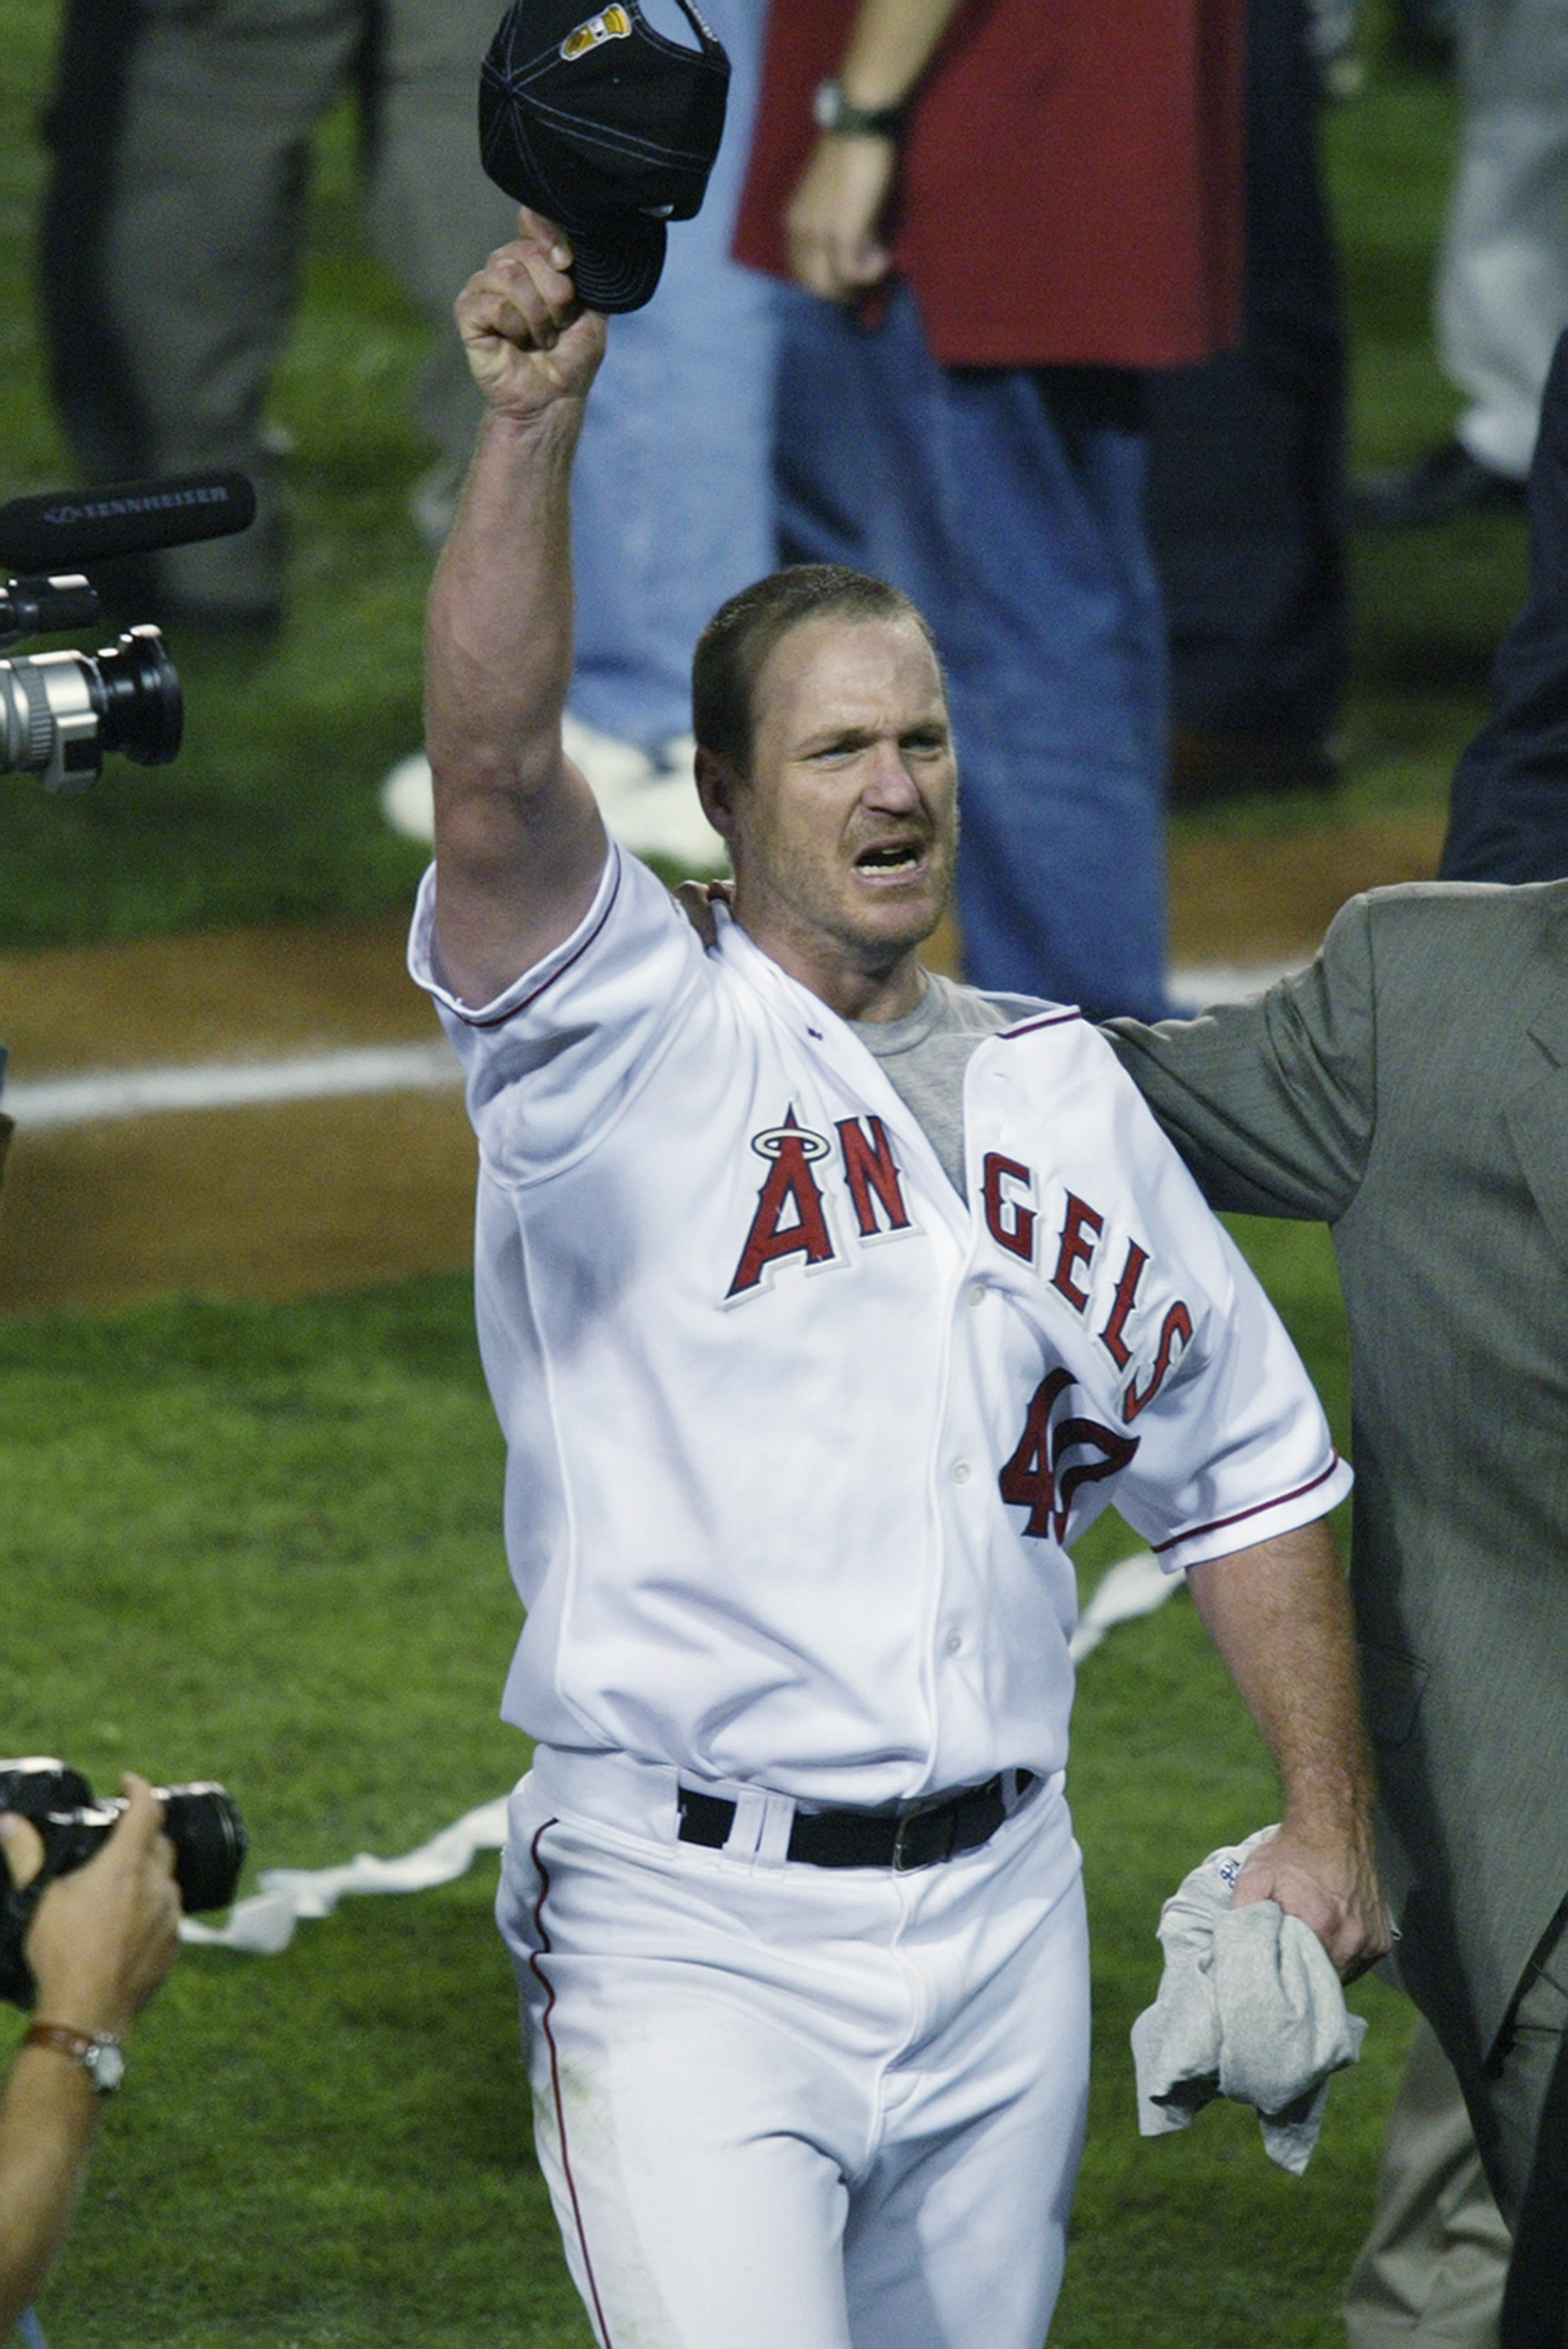 ANAHEIM, CA - OCTOBER 27:  Troy Percival #40 of the Anaheim Angels salutes the crowd after the victory over the San Francisco Giants as he is led to an interview after game seven of the World Series on October 27, 2002 at Edison Field in Anaheim, Californ